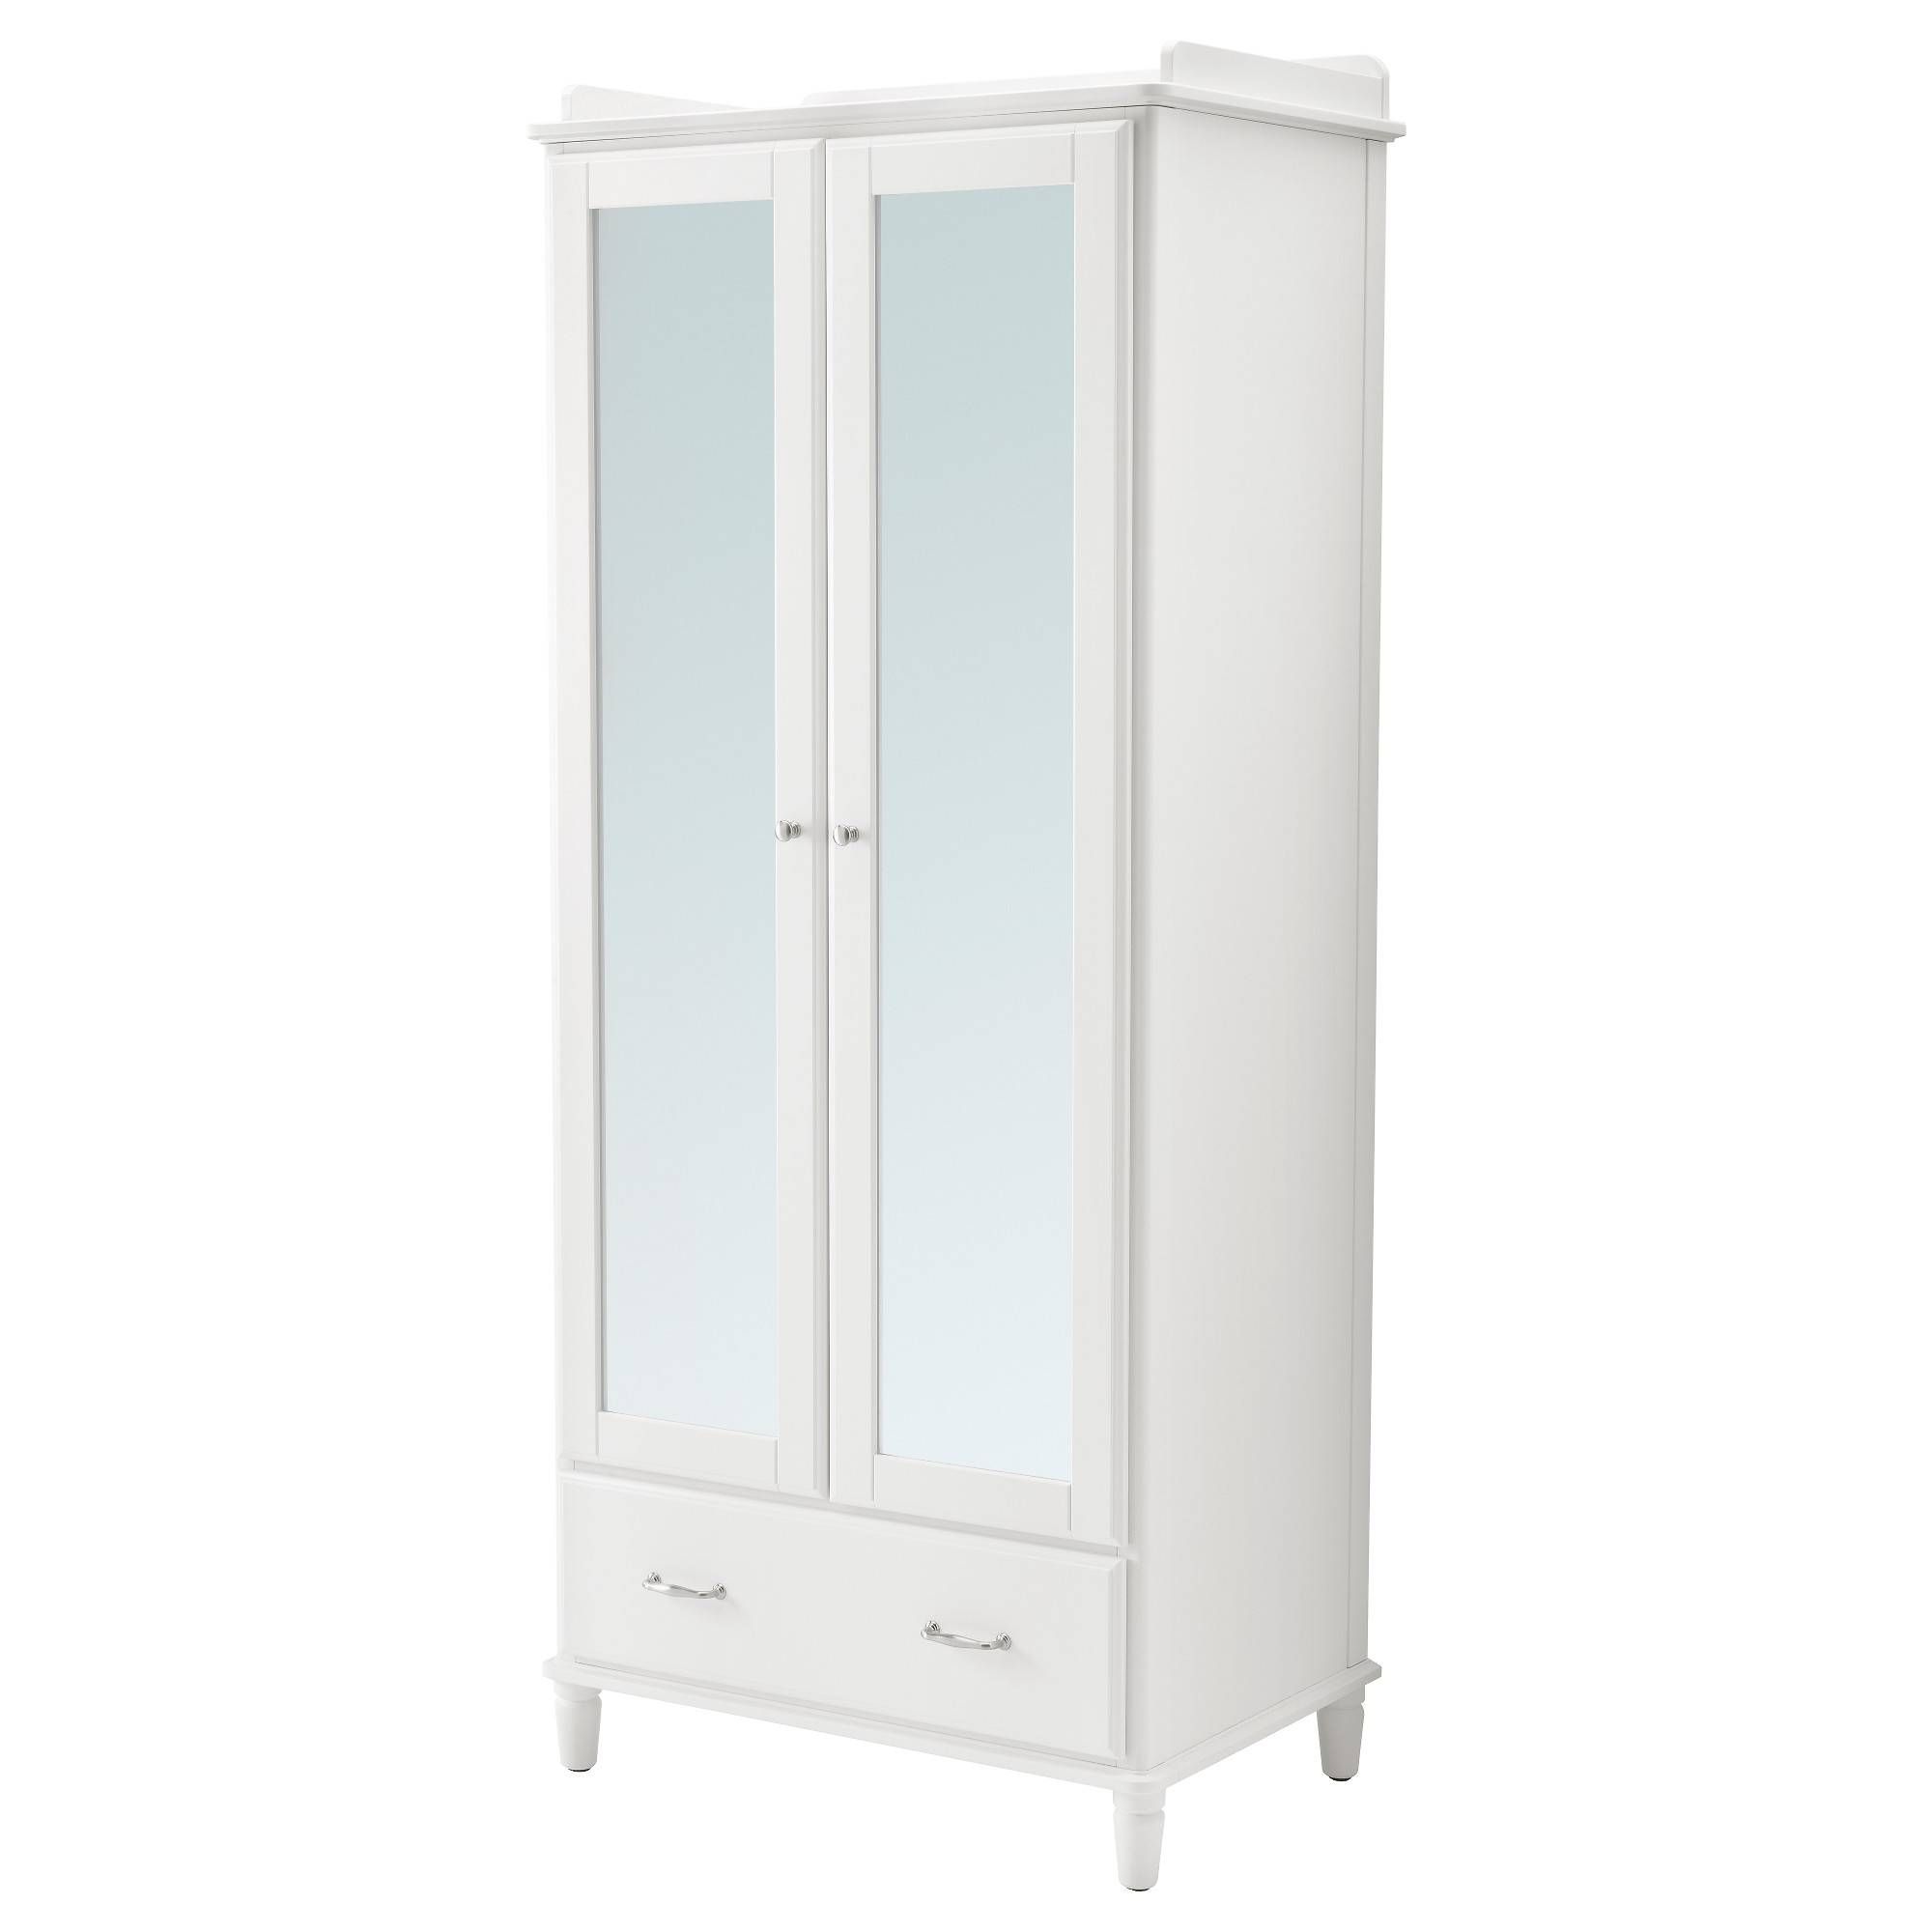 Wardrobes | Ikea Within White Wardrobes With Drawers And Mirror (View 3 of 15)